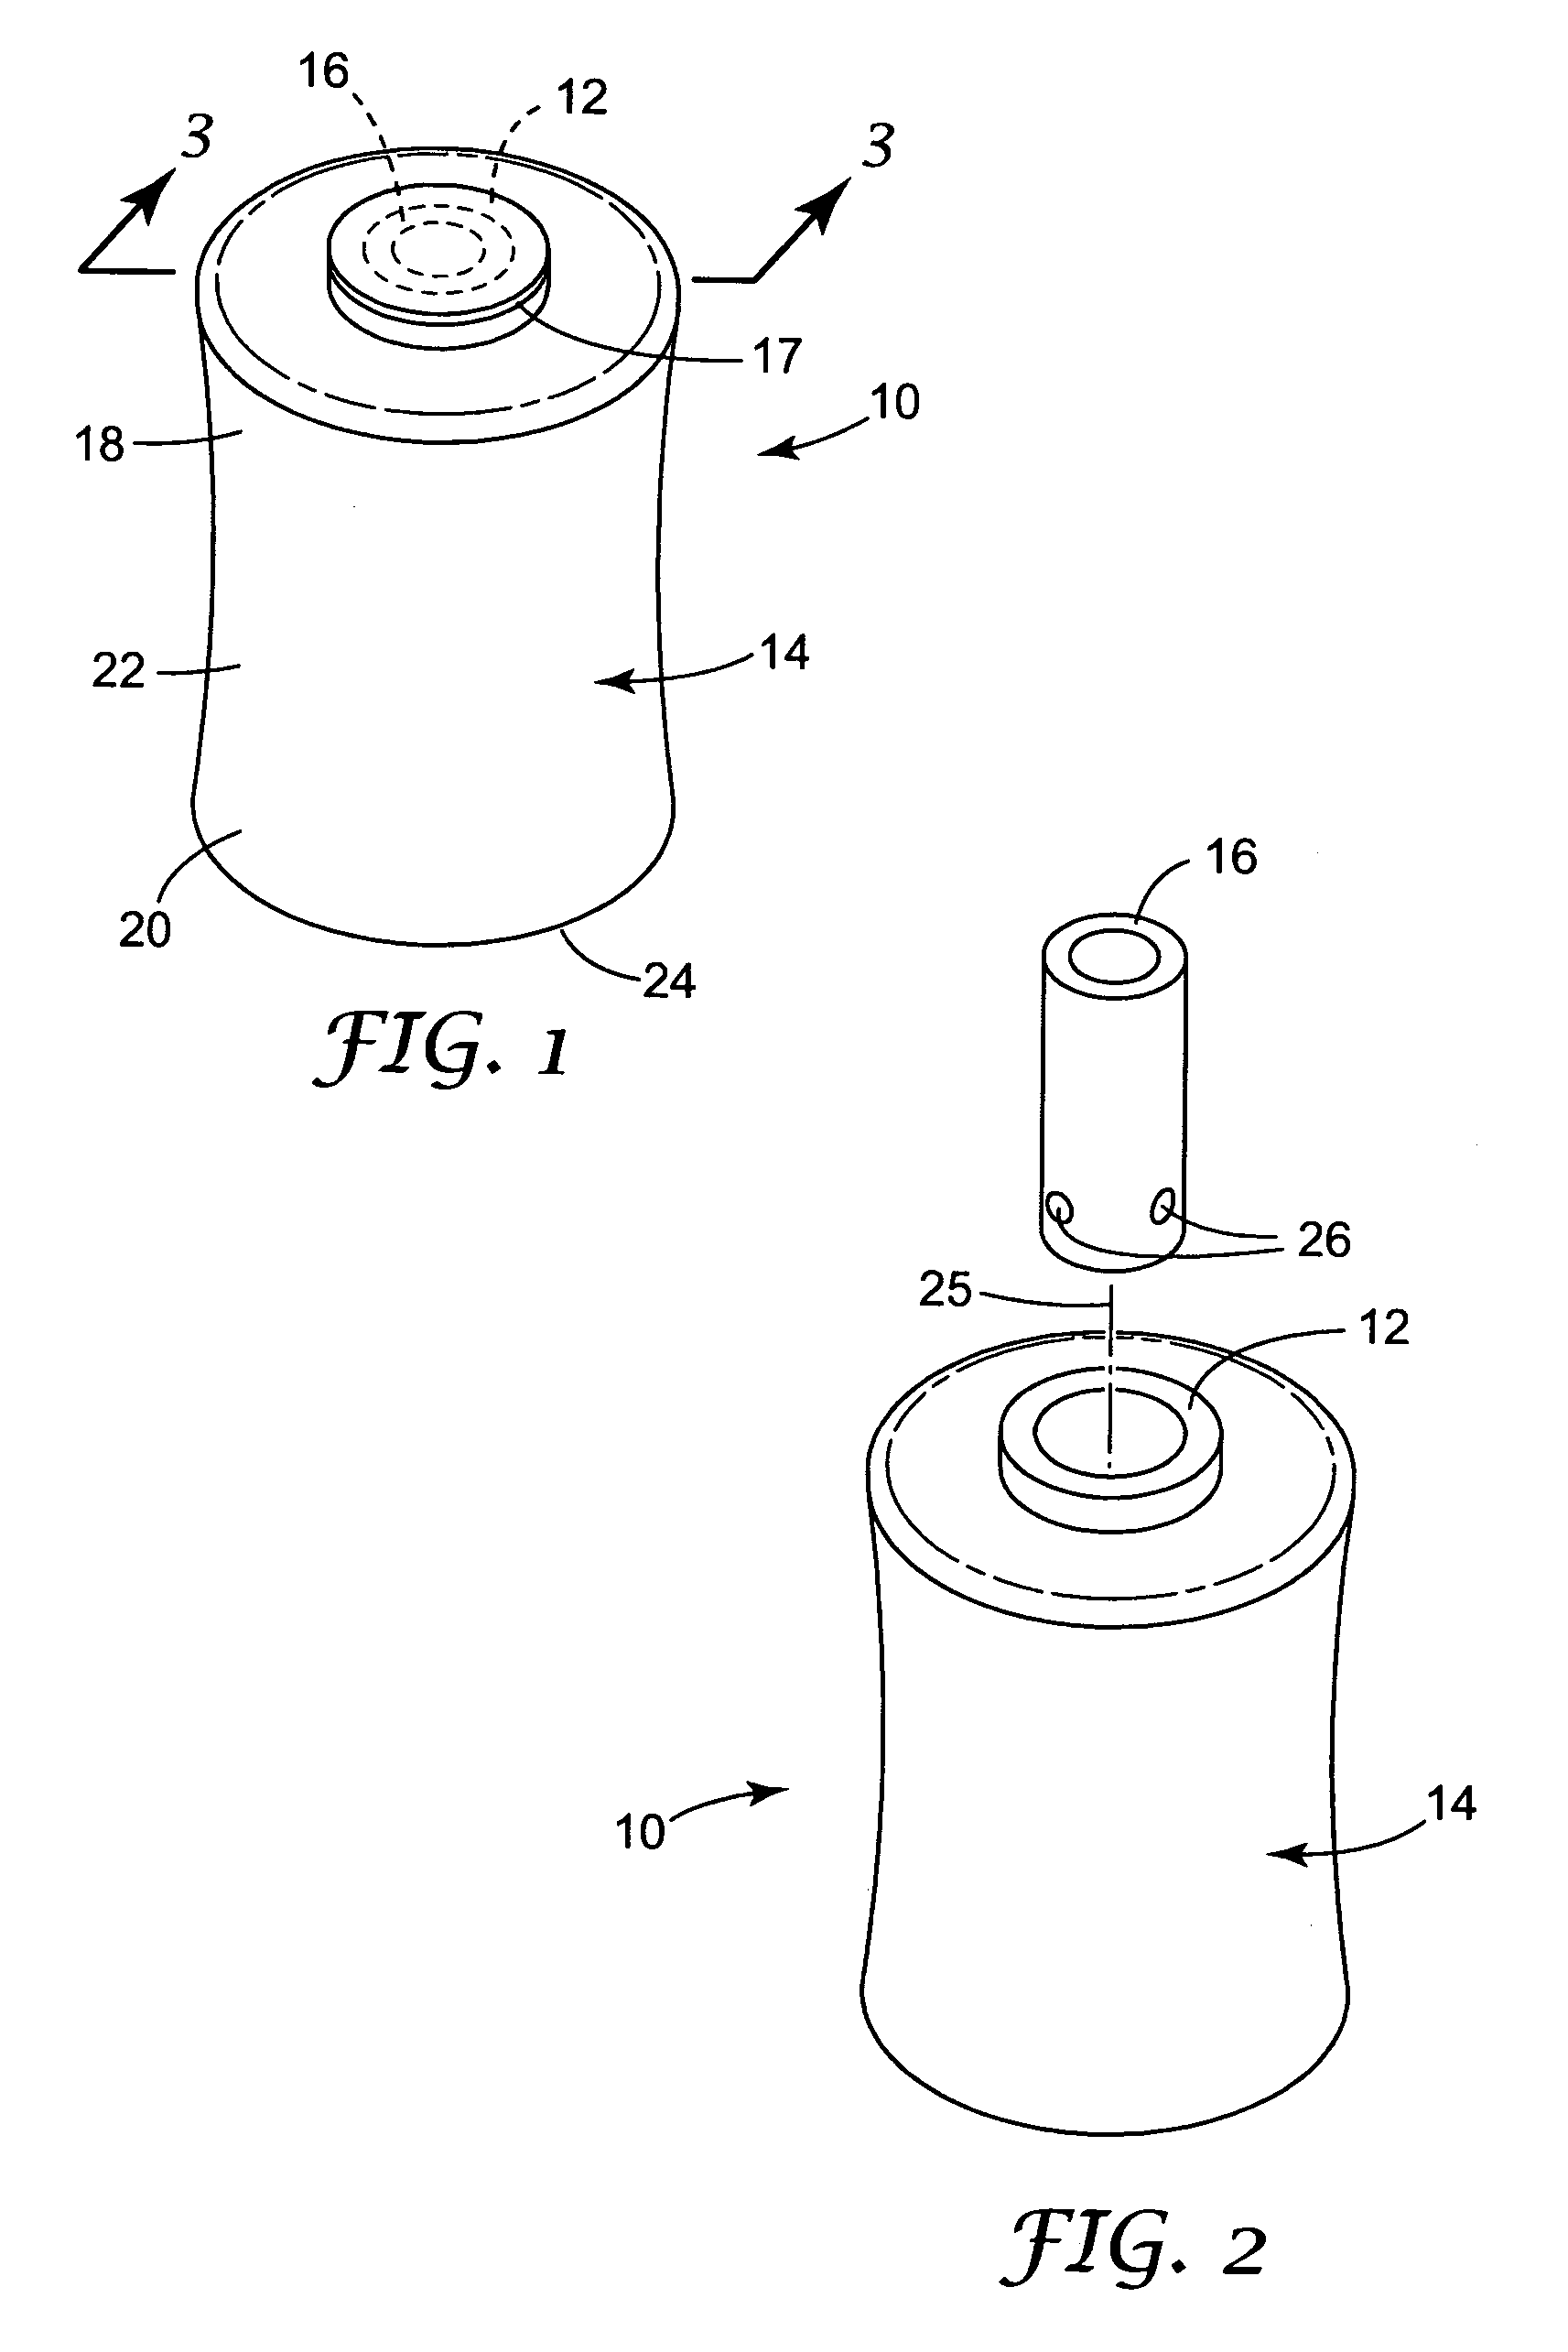 Unit dose delivery system